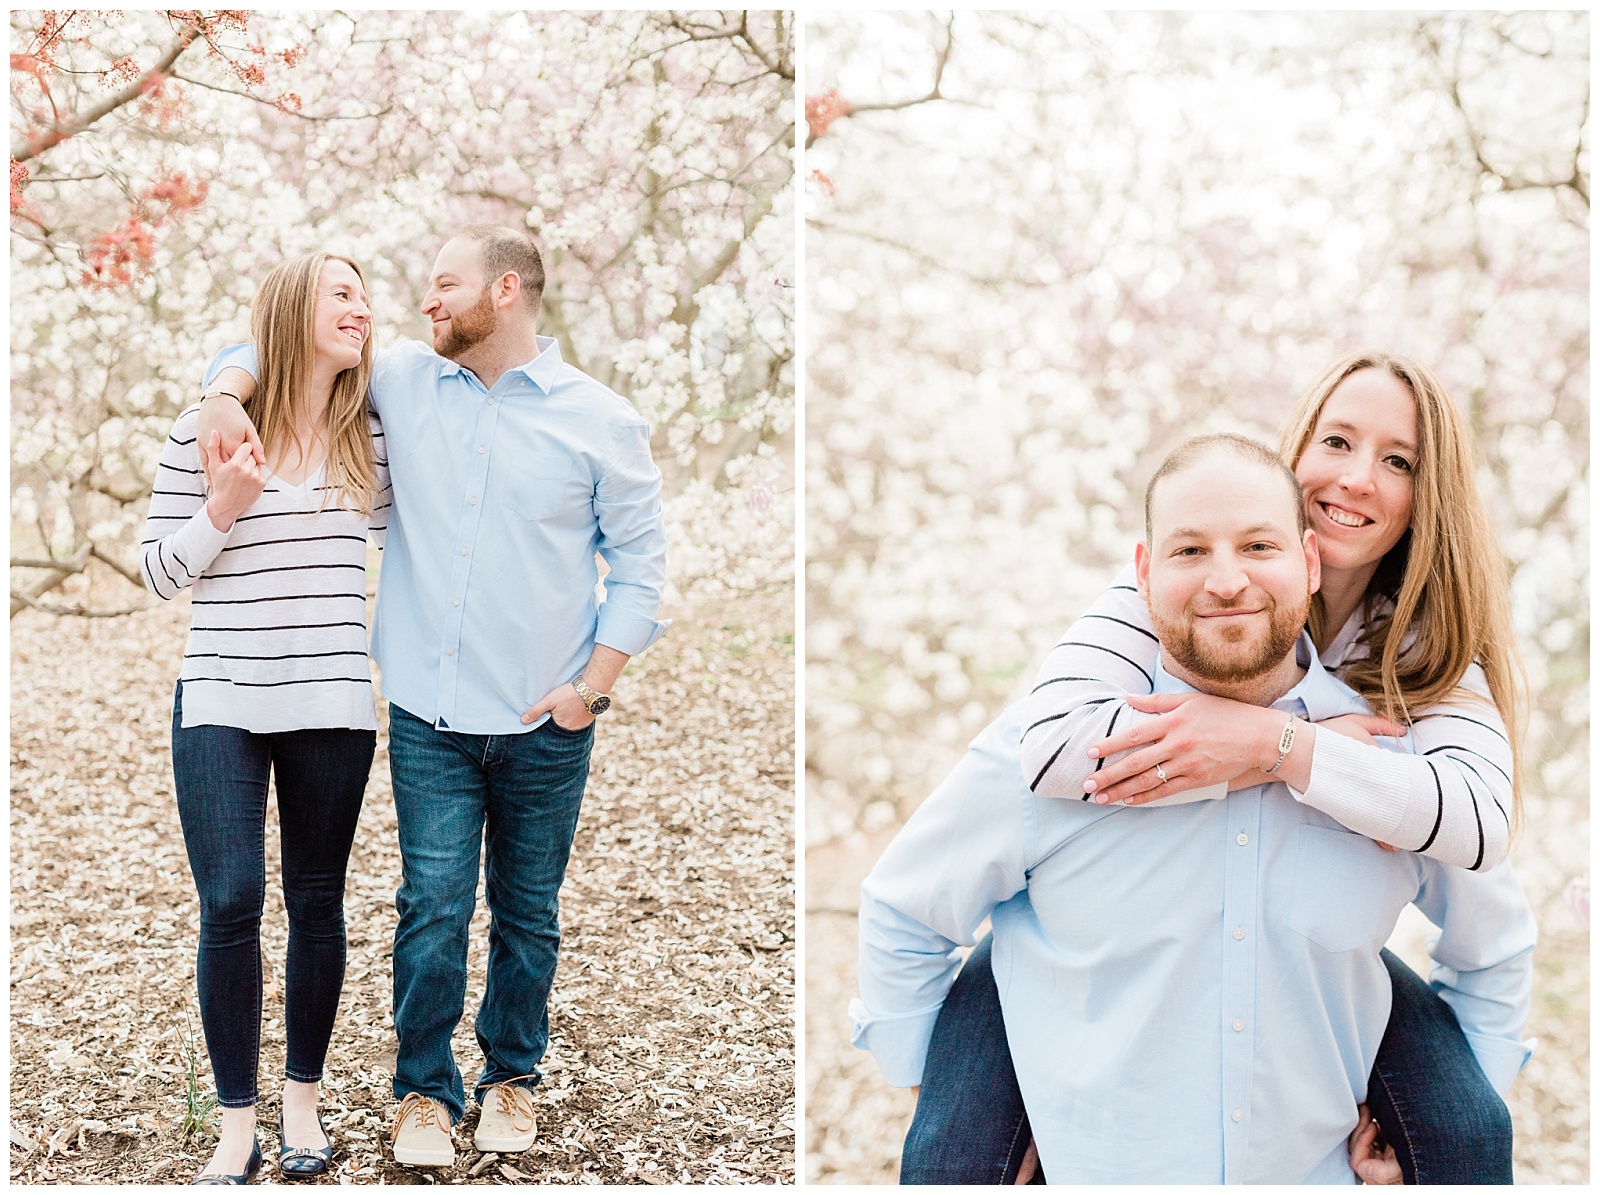 Central Park, NYC engagement session, springtime, wedding photographer, New York, flowers, blooming